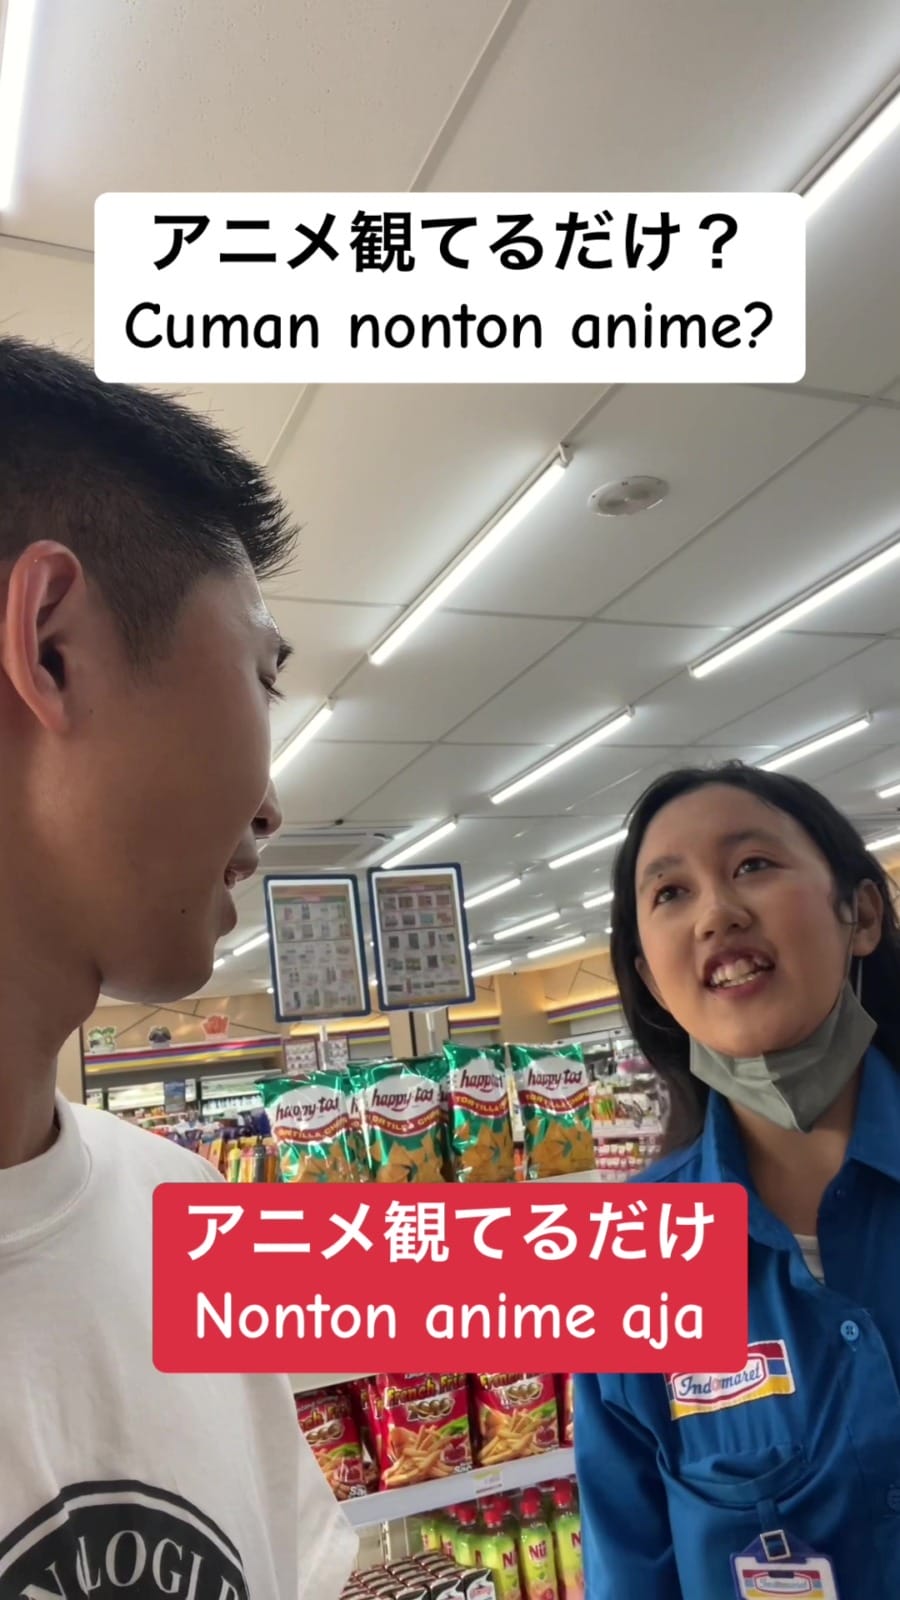 indonesian girl convenient store staff learns japanese by watching anime fluent man surprised 7